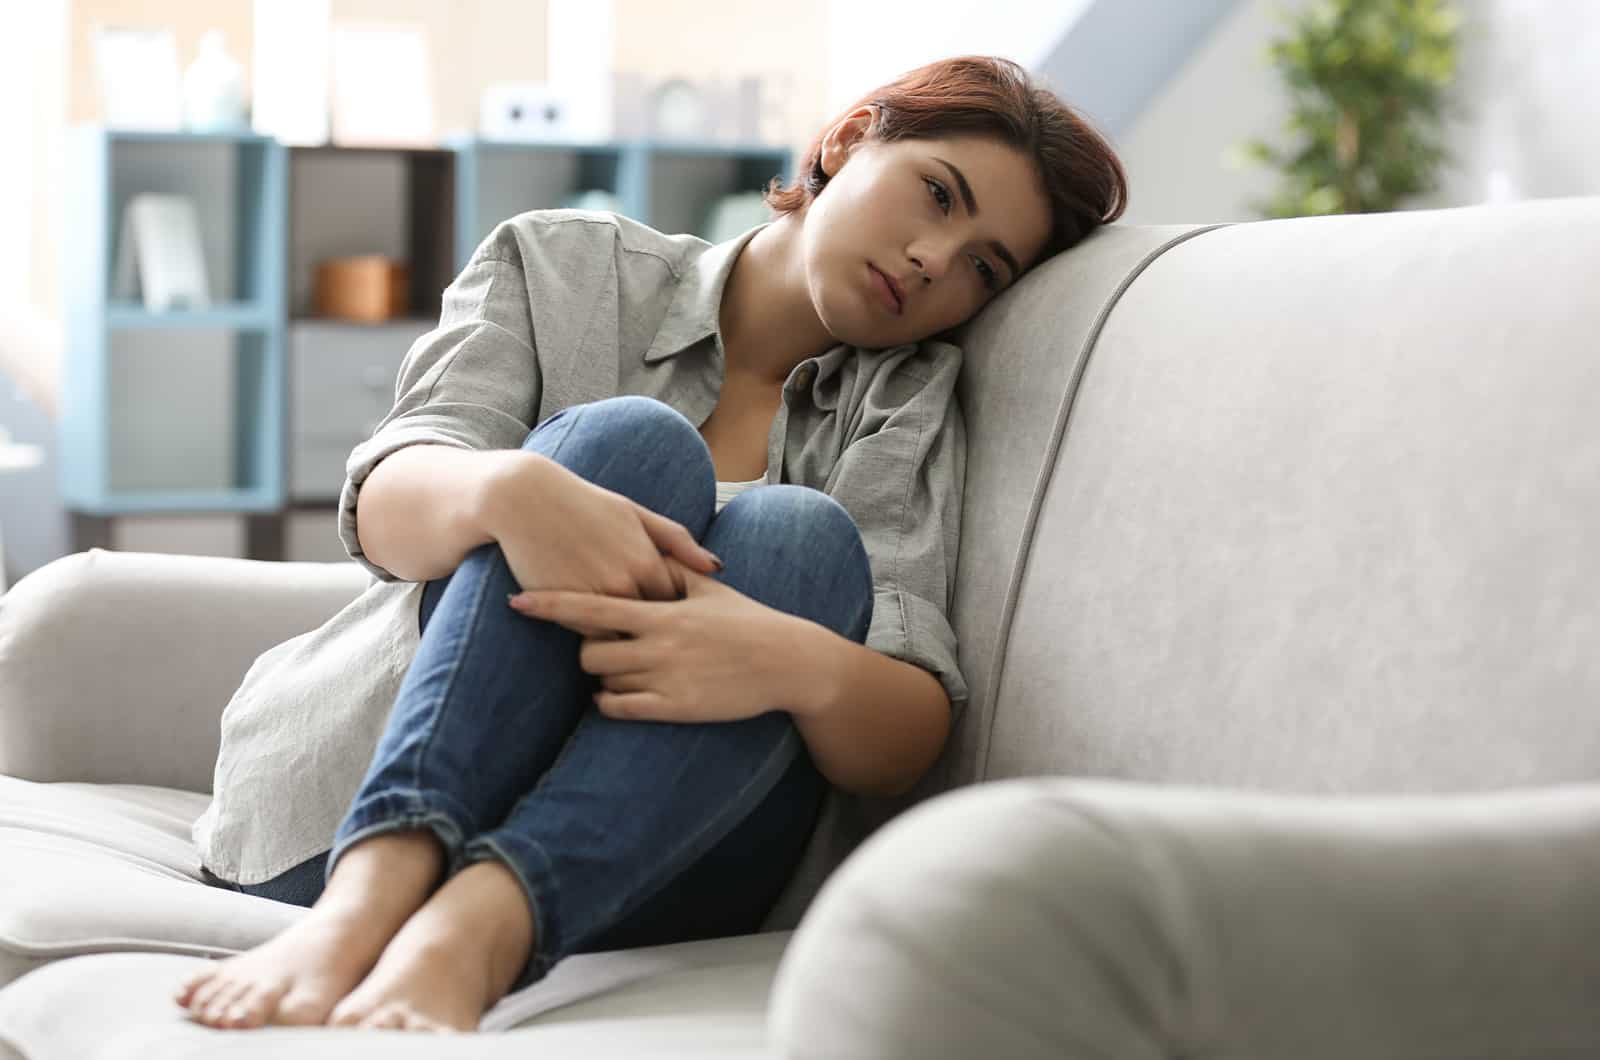 sad young woman sitting on couch